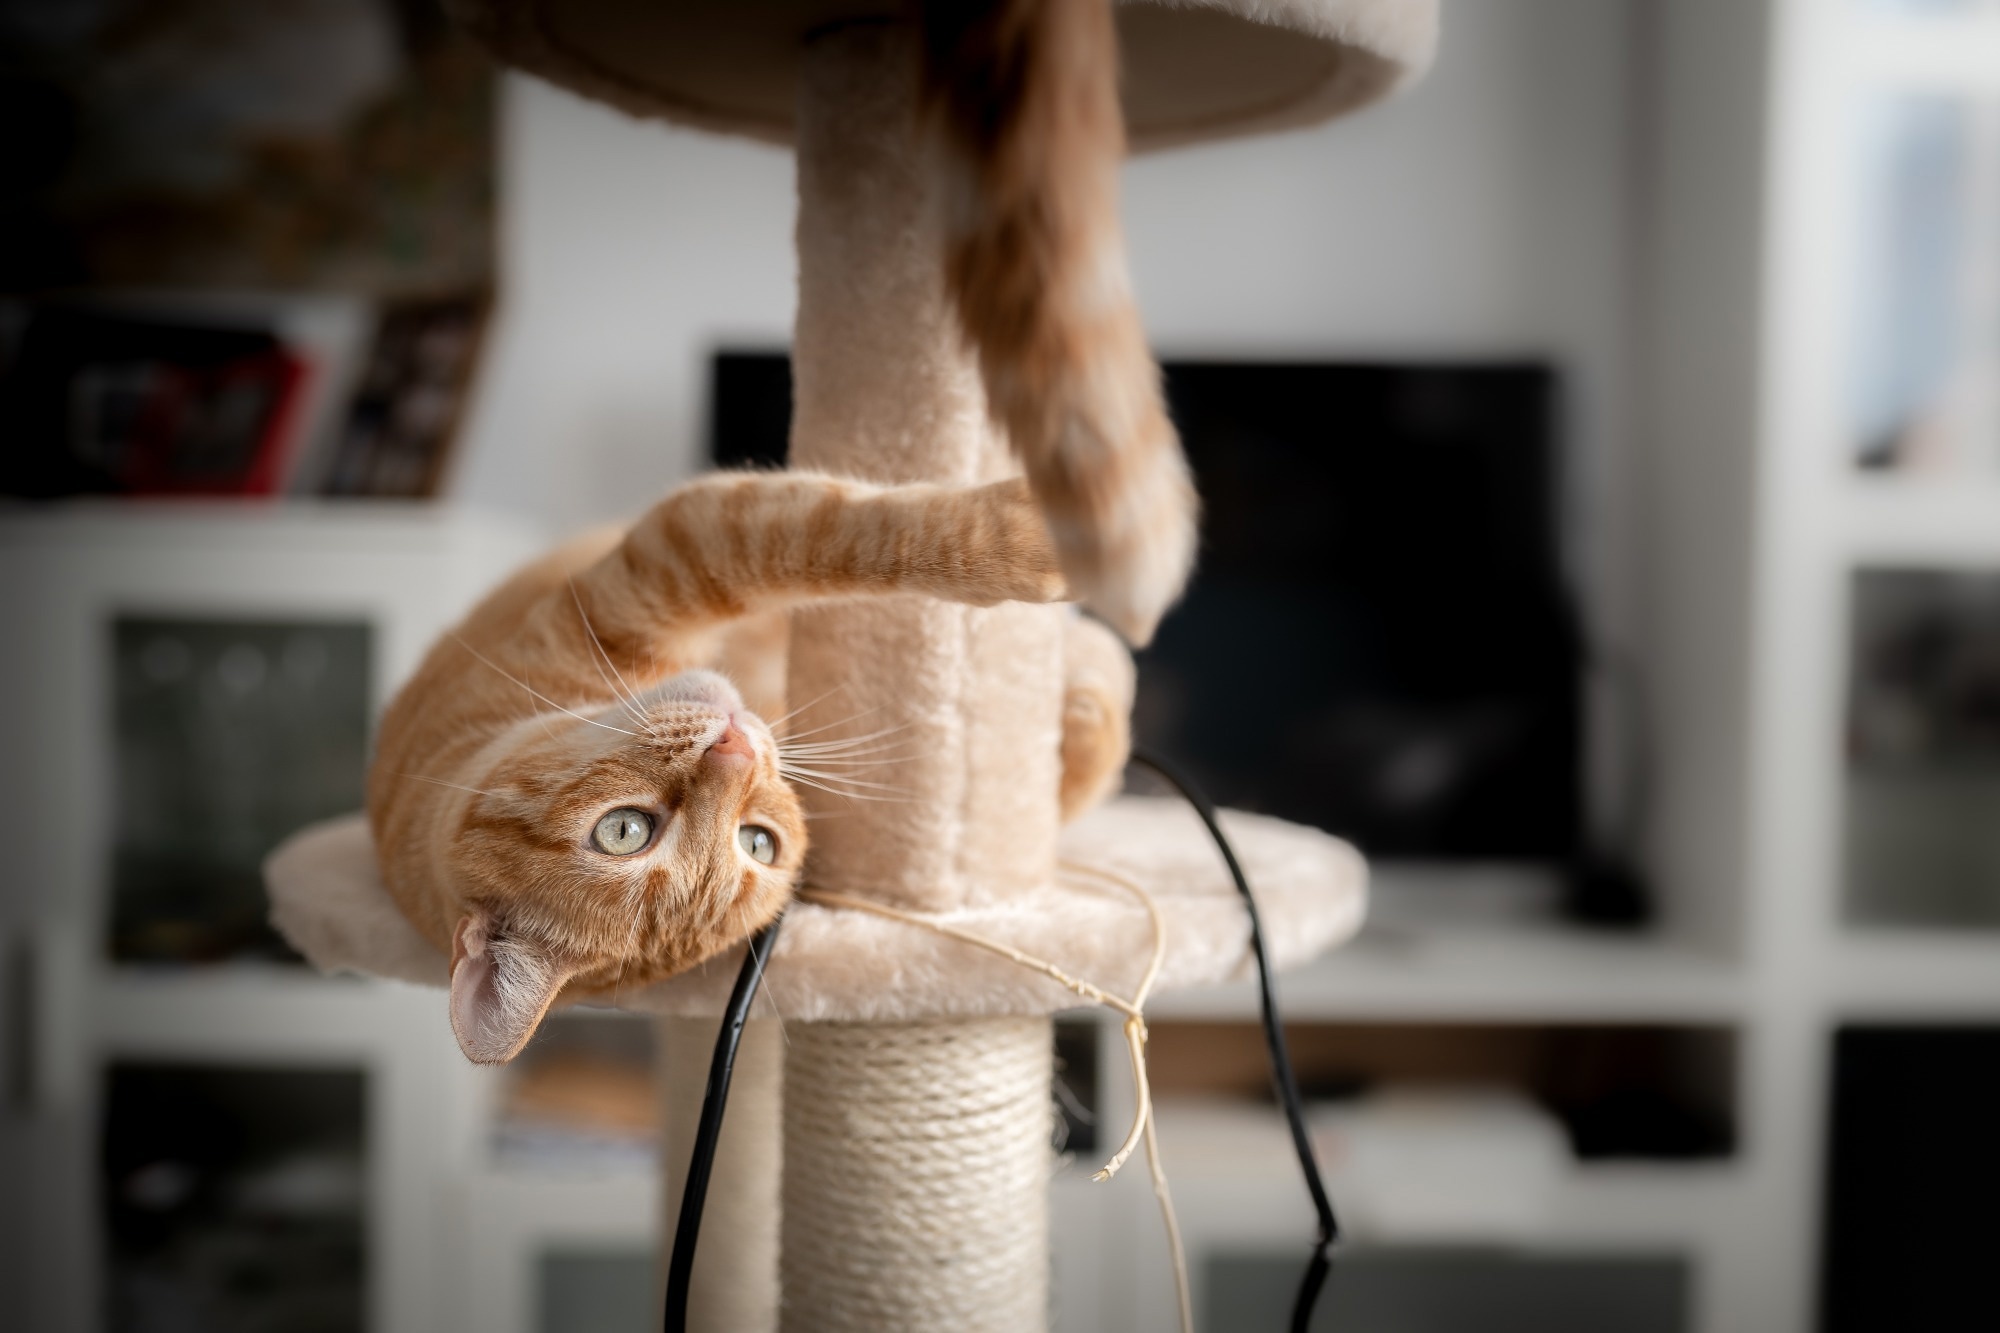 Study: Efficient direct and limited environmental transmission of SARS-CoV-2 lineage B.1.22 in domestic cats. Image Credit: Magui RF / Shutterstock